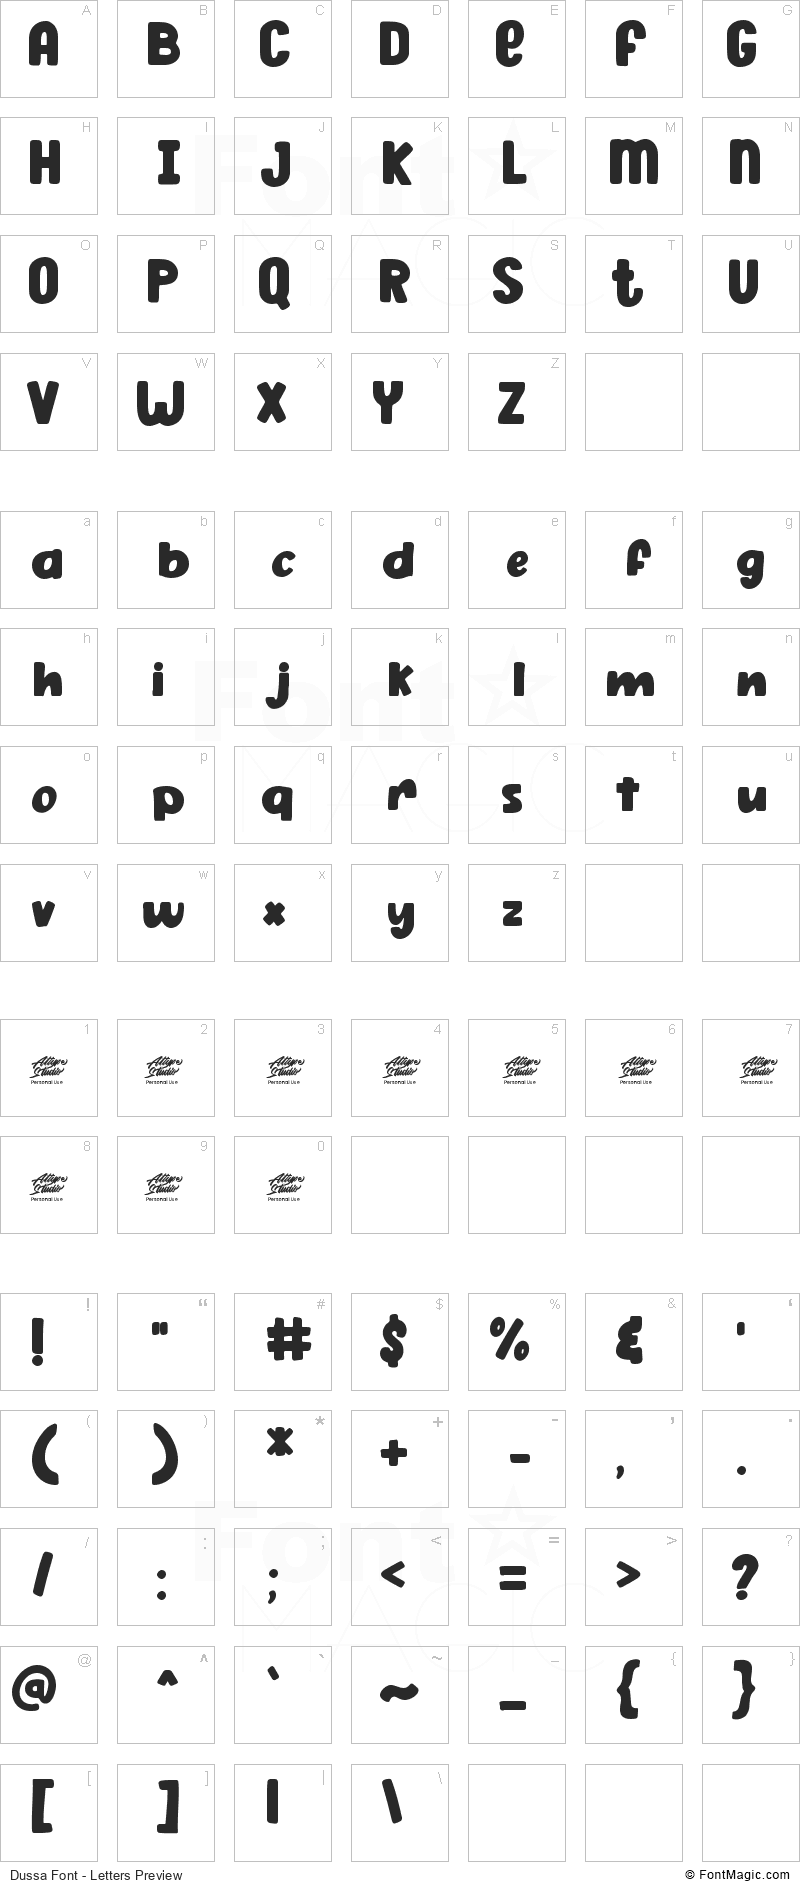 Dussa Font - All Latters Preview Chart